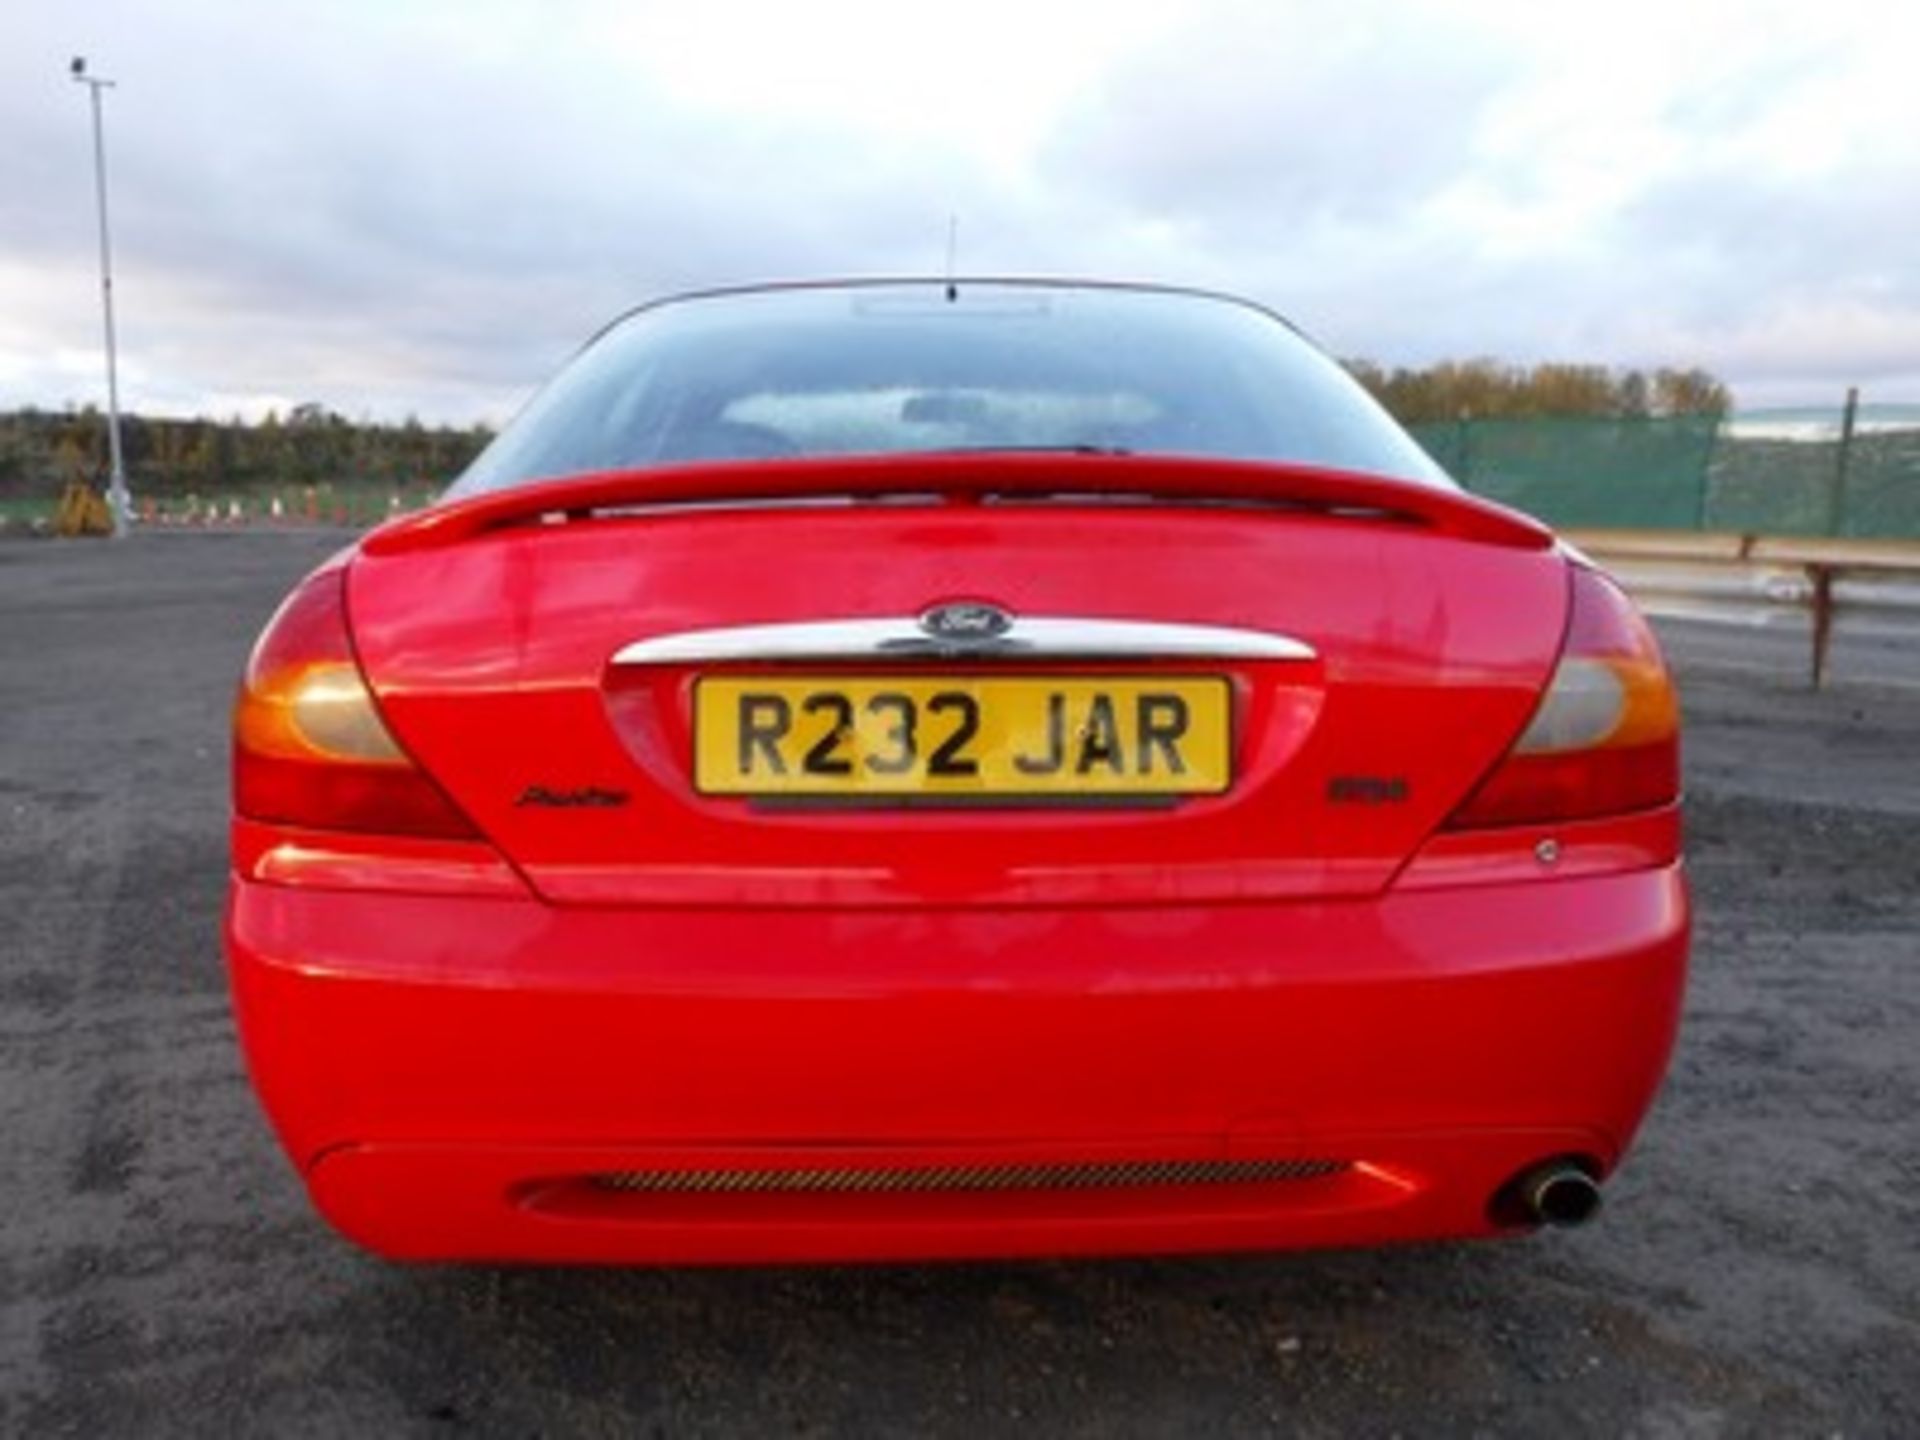 FORD MONDEO ST 24 V6 - 2497cc - Image 12 of 24